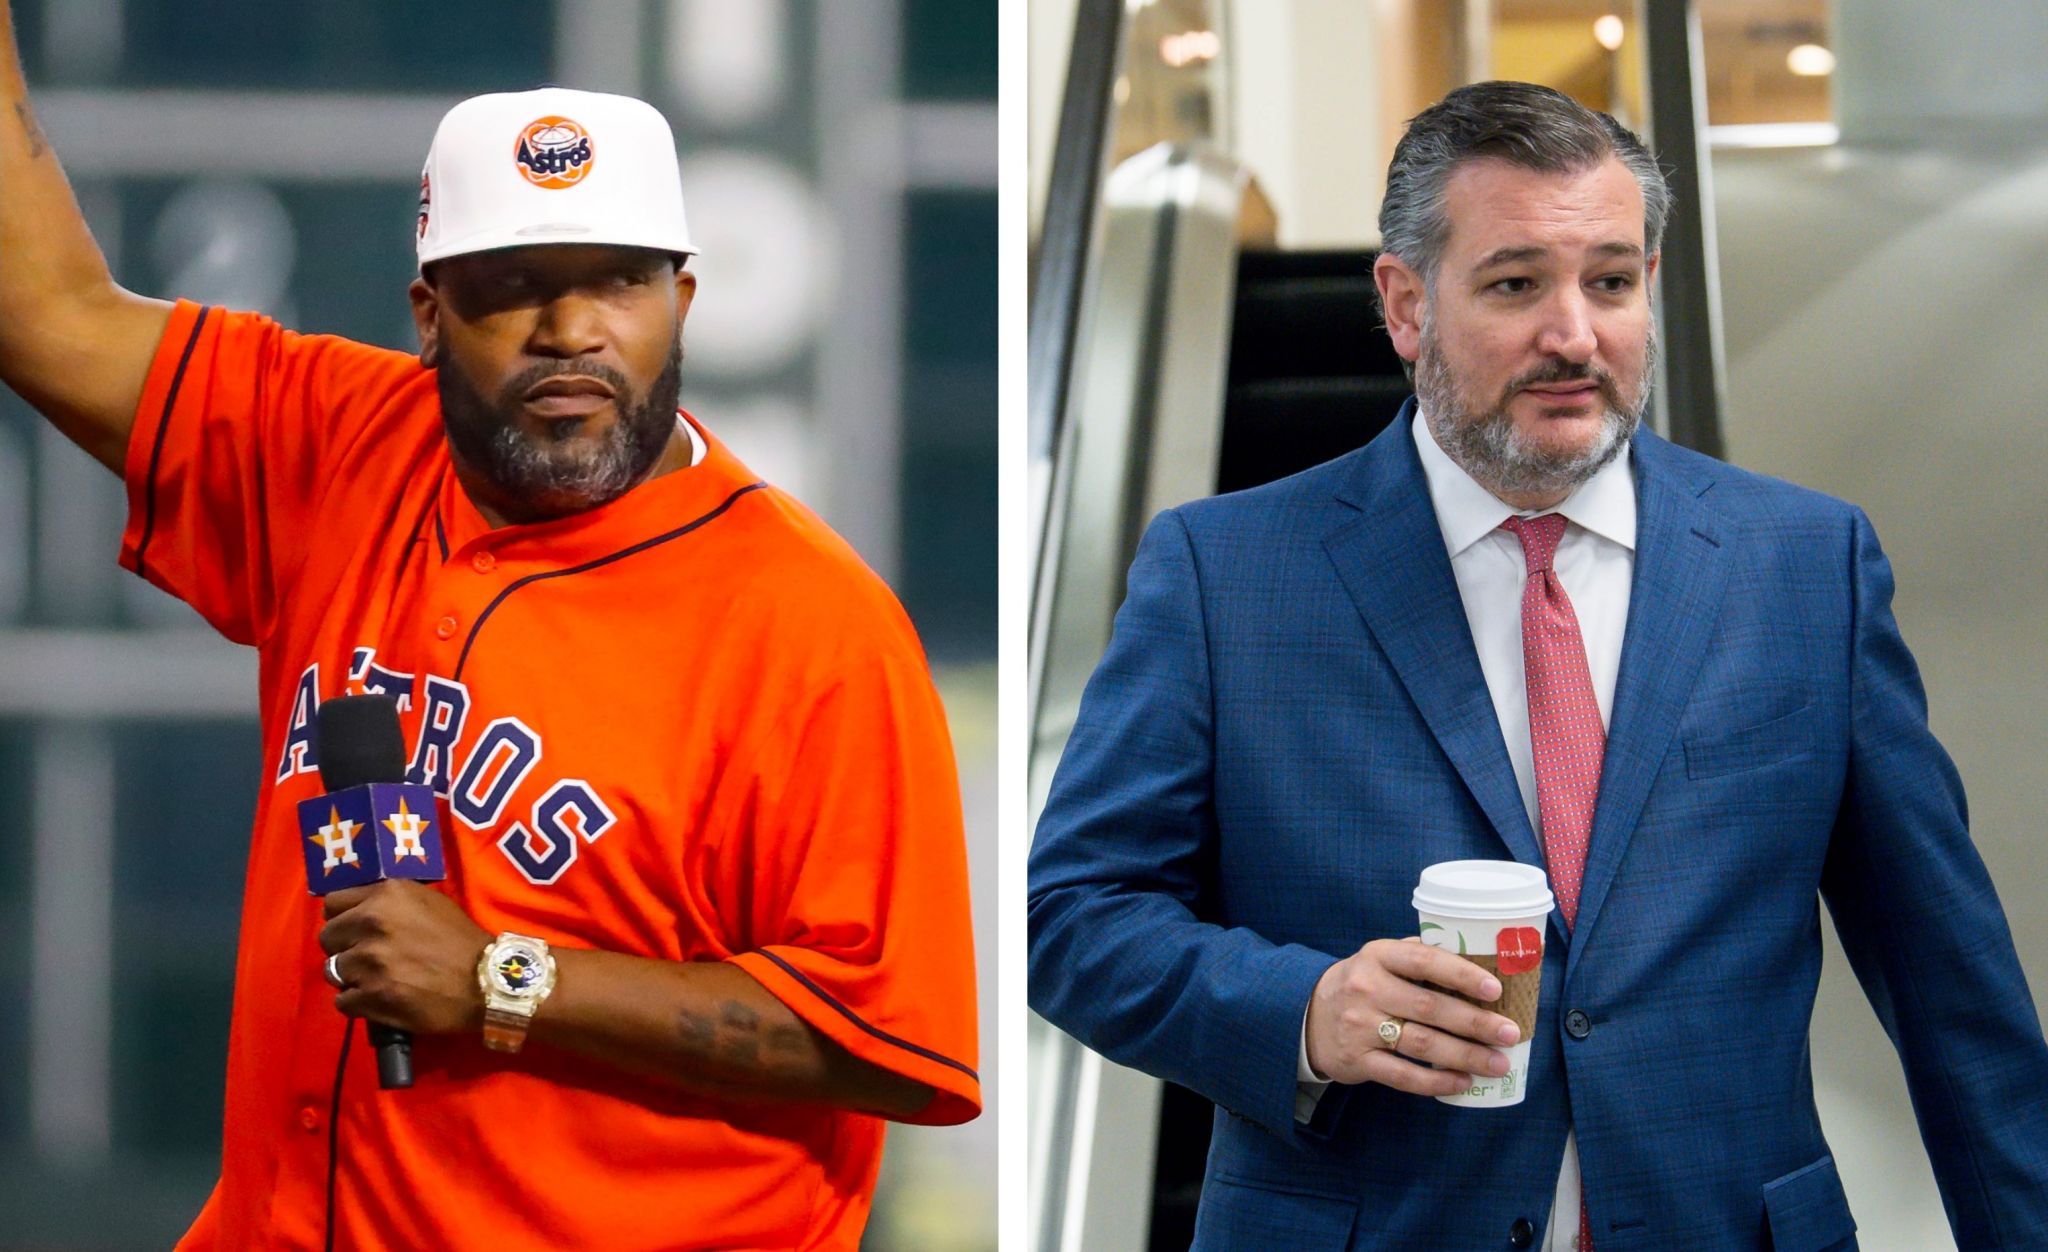 Bun B heckles Ted Cruz at Astros game: 'Where you going? To Cancun?